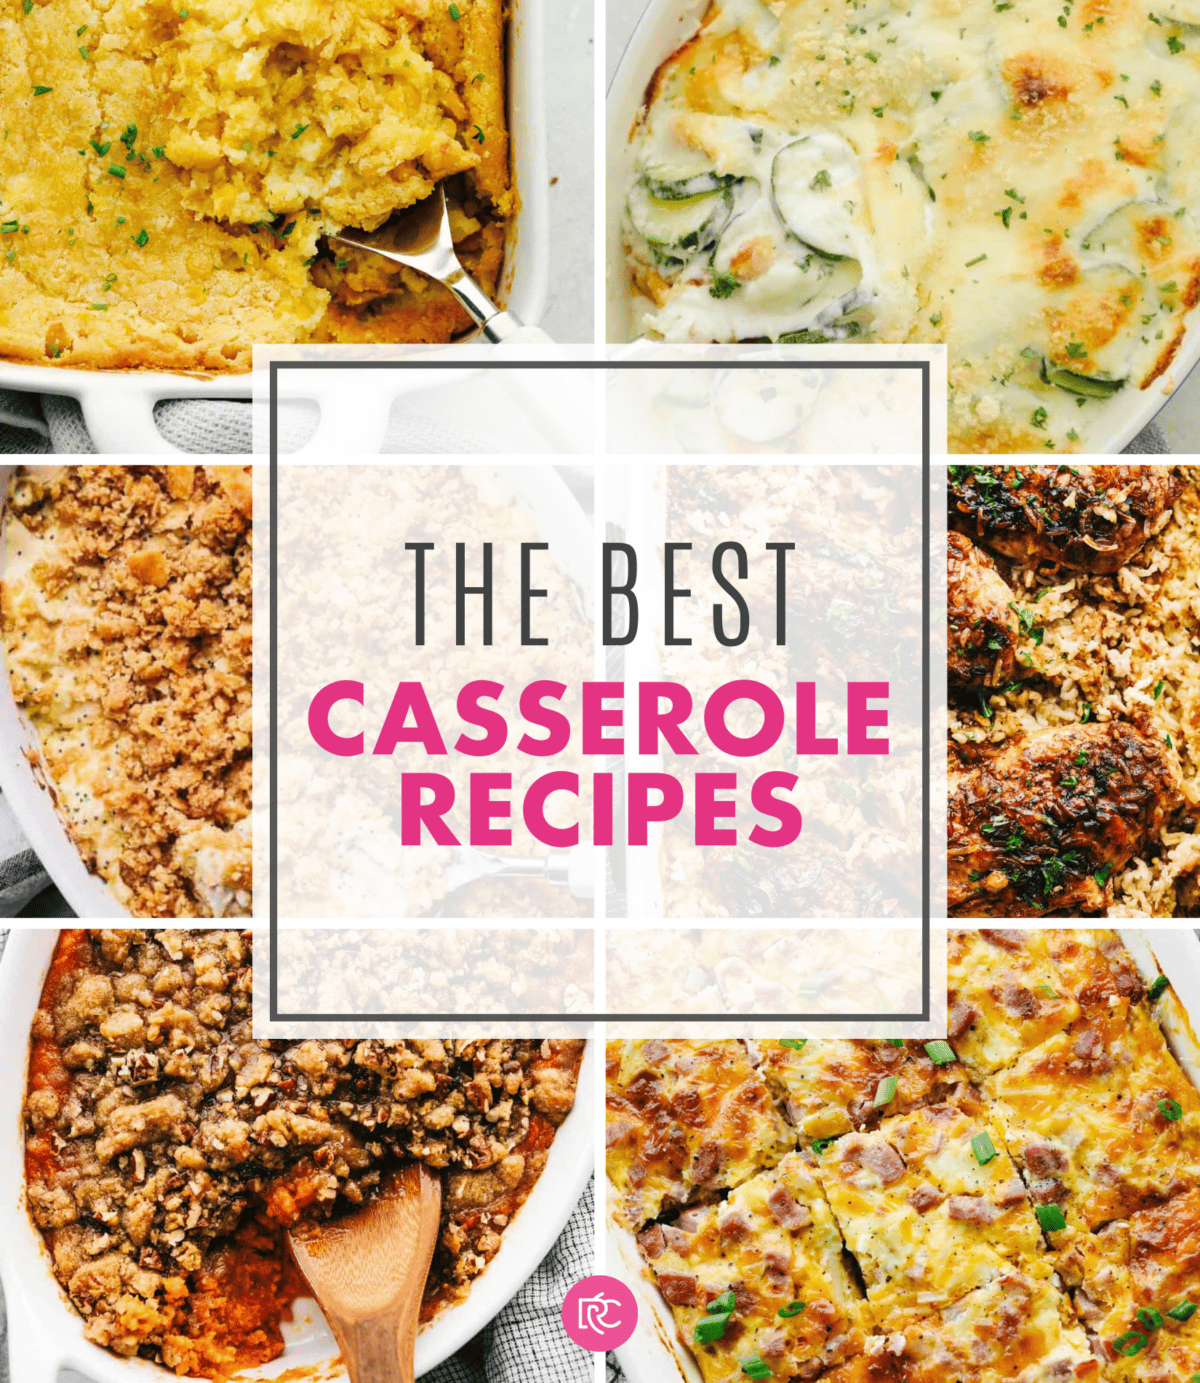 A collage of 6 casseroles with "the best casserole recipes" written in the middle.